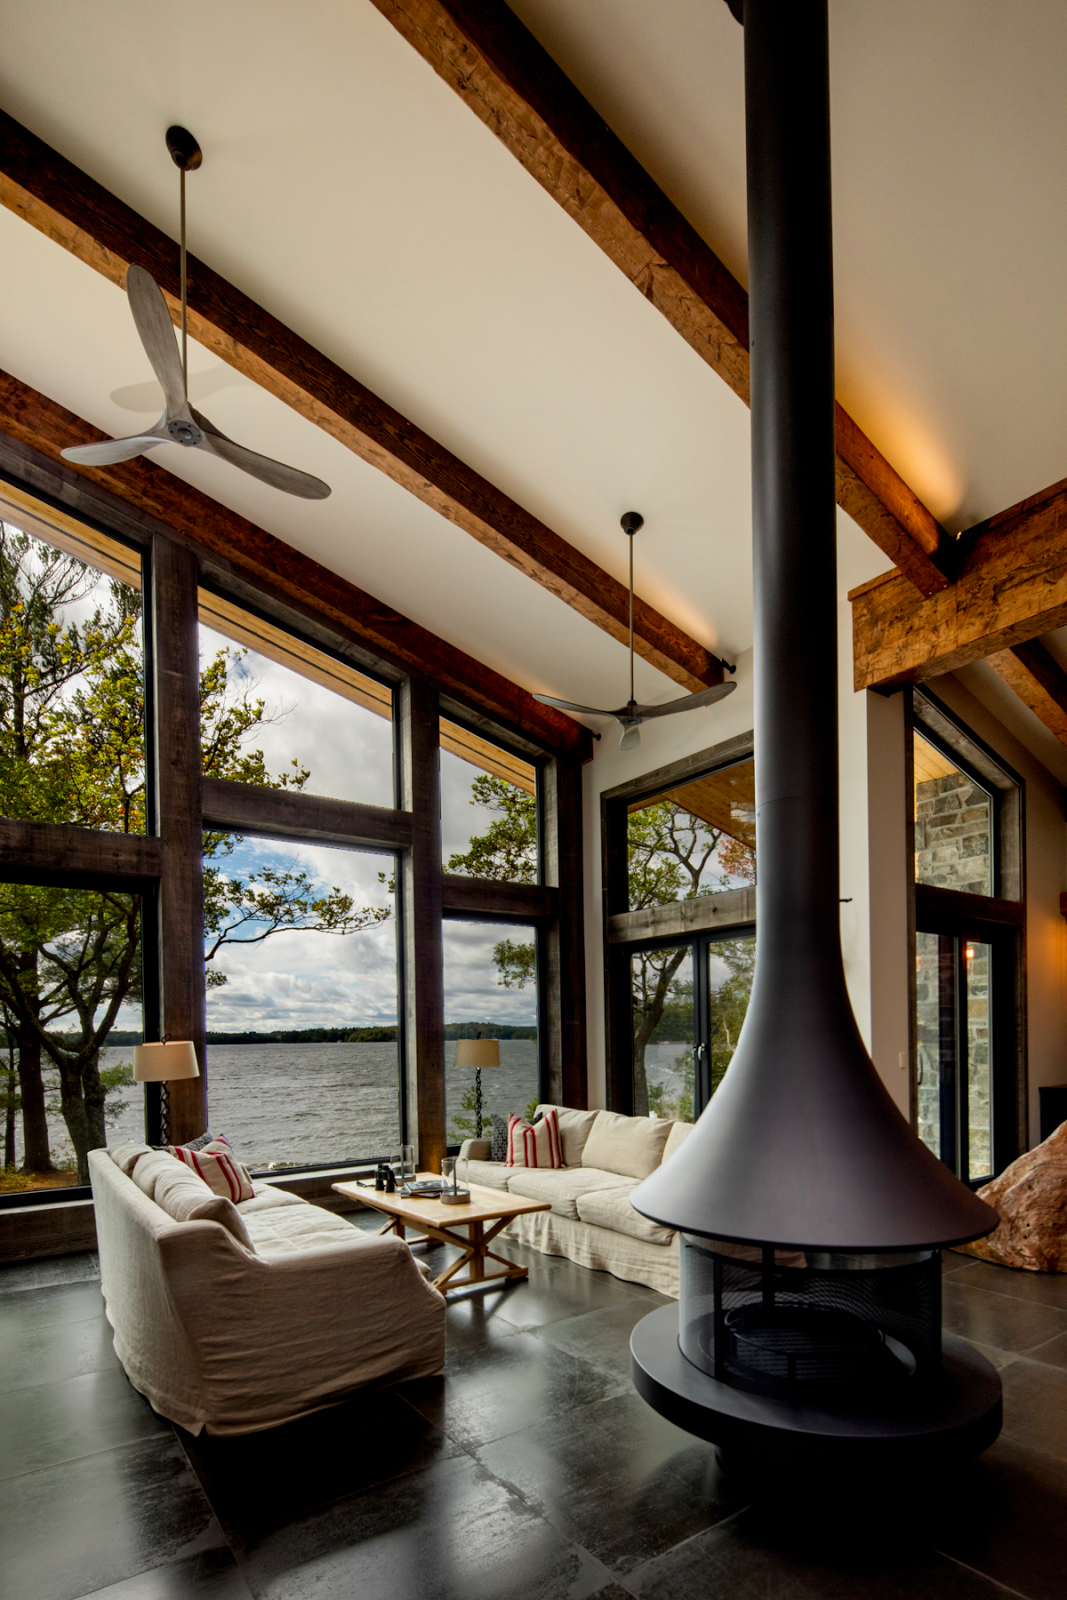 How To Get The Chic Lake Rosseau Cottage Style On Any Lake 4